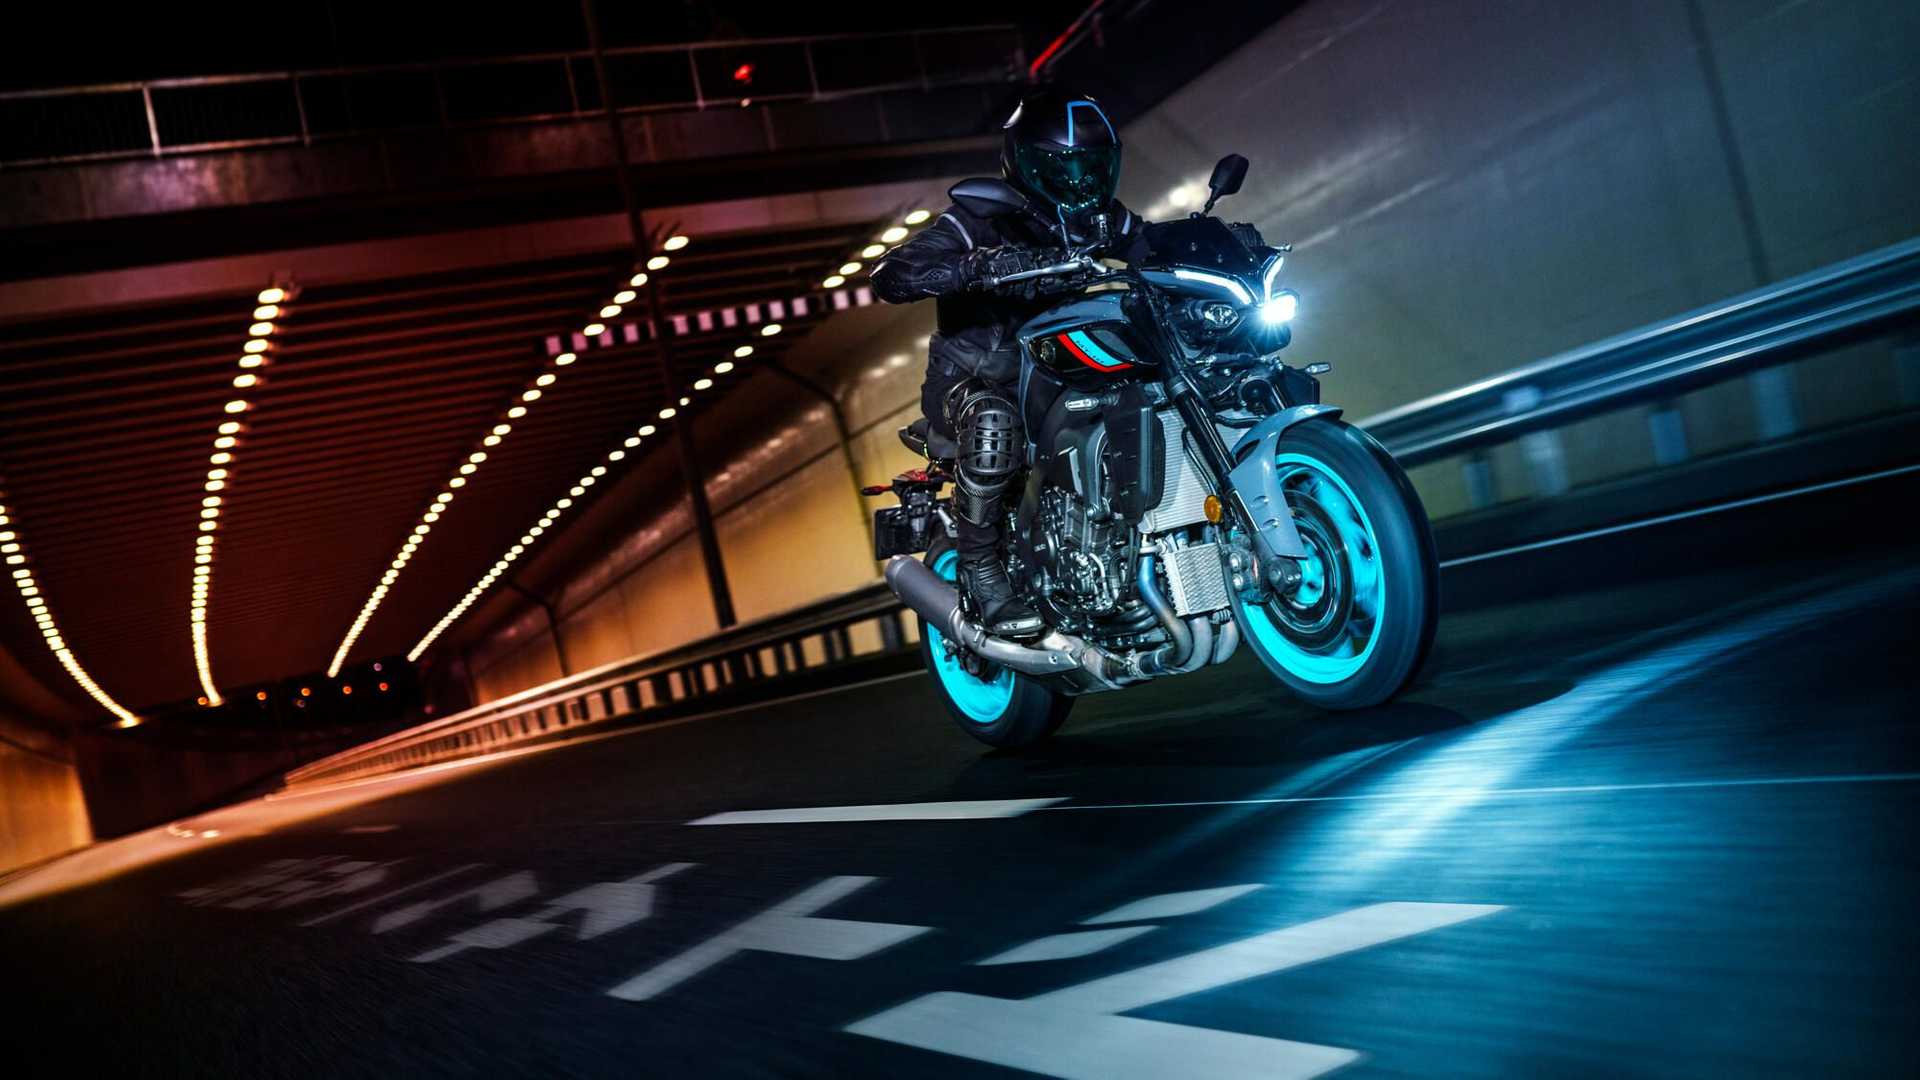 A rider on the 2022 Yamaha MT-10 riding through a tunnel at night